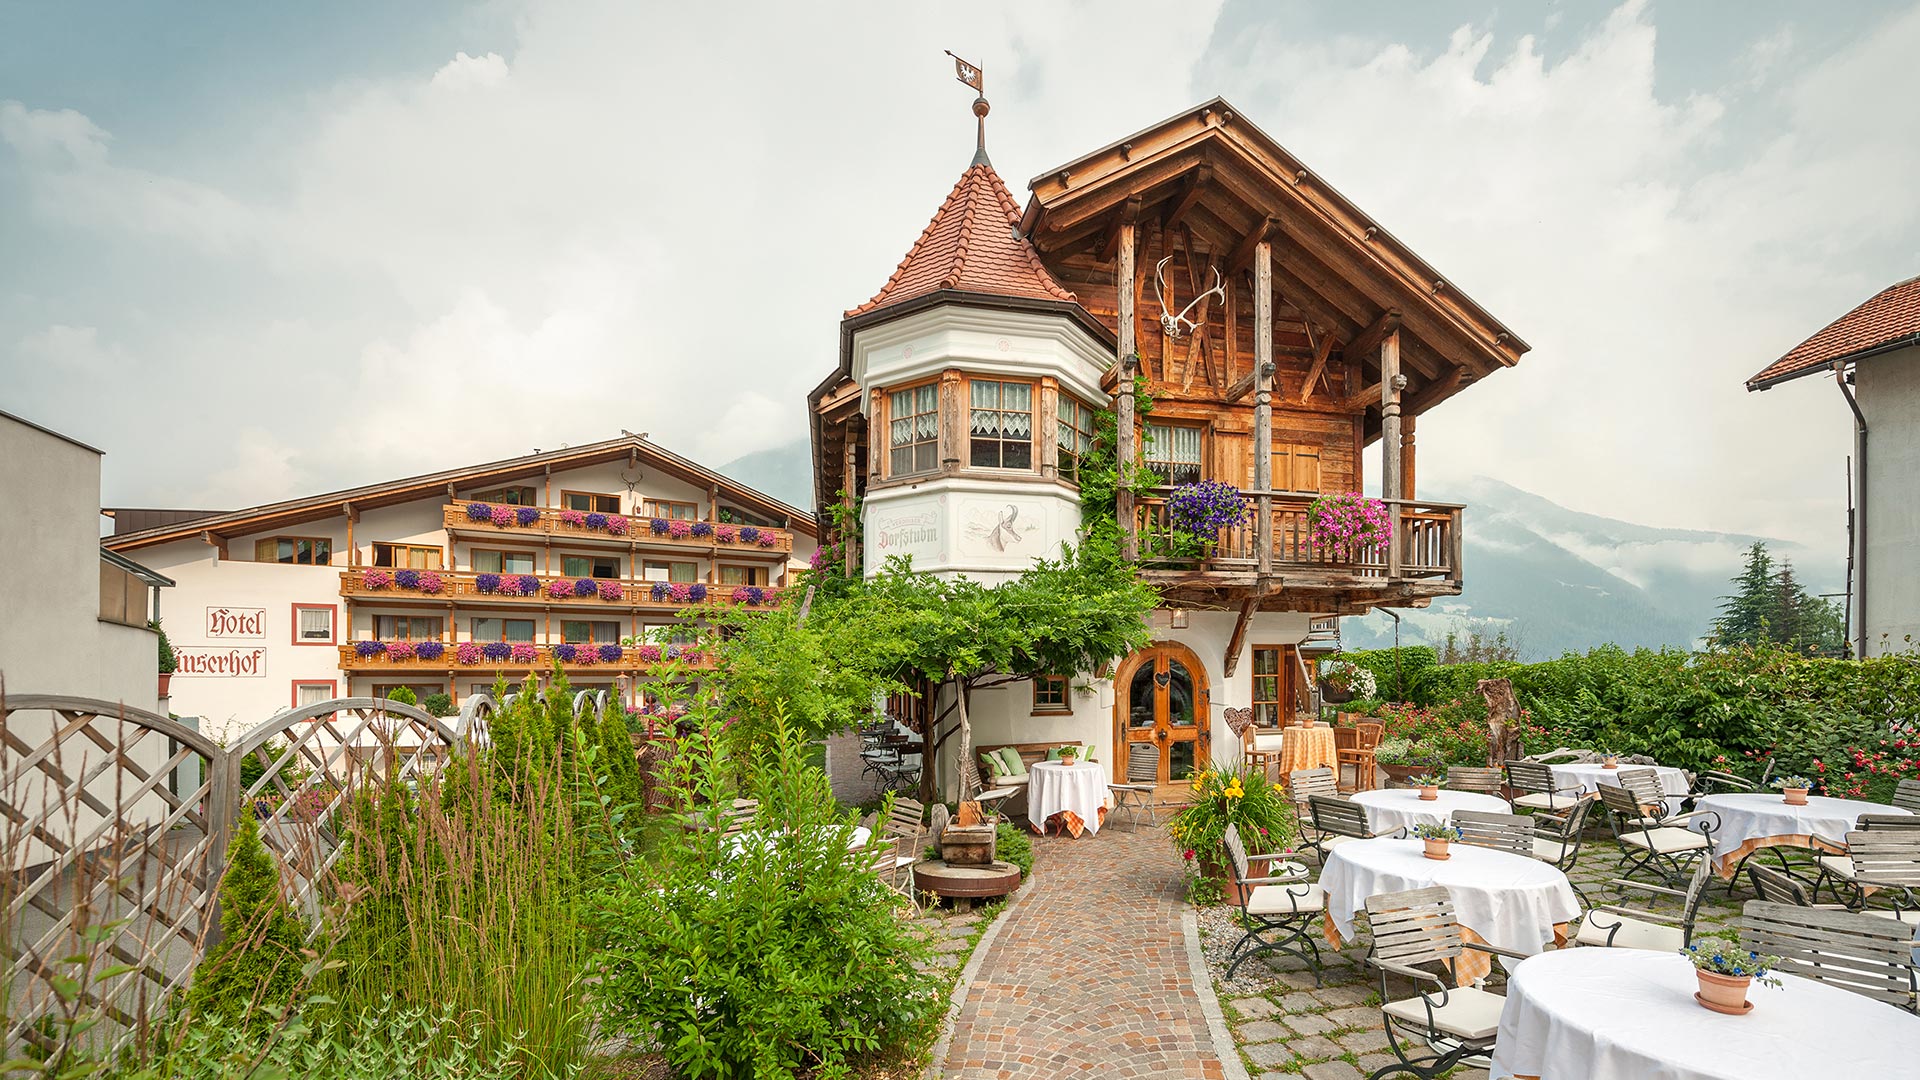 The Verdinser Hof also houses a classic restaurant in Scena, the stube: enjoy traditional cuisine and experience typical South Tyrolean hospitality.